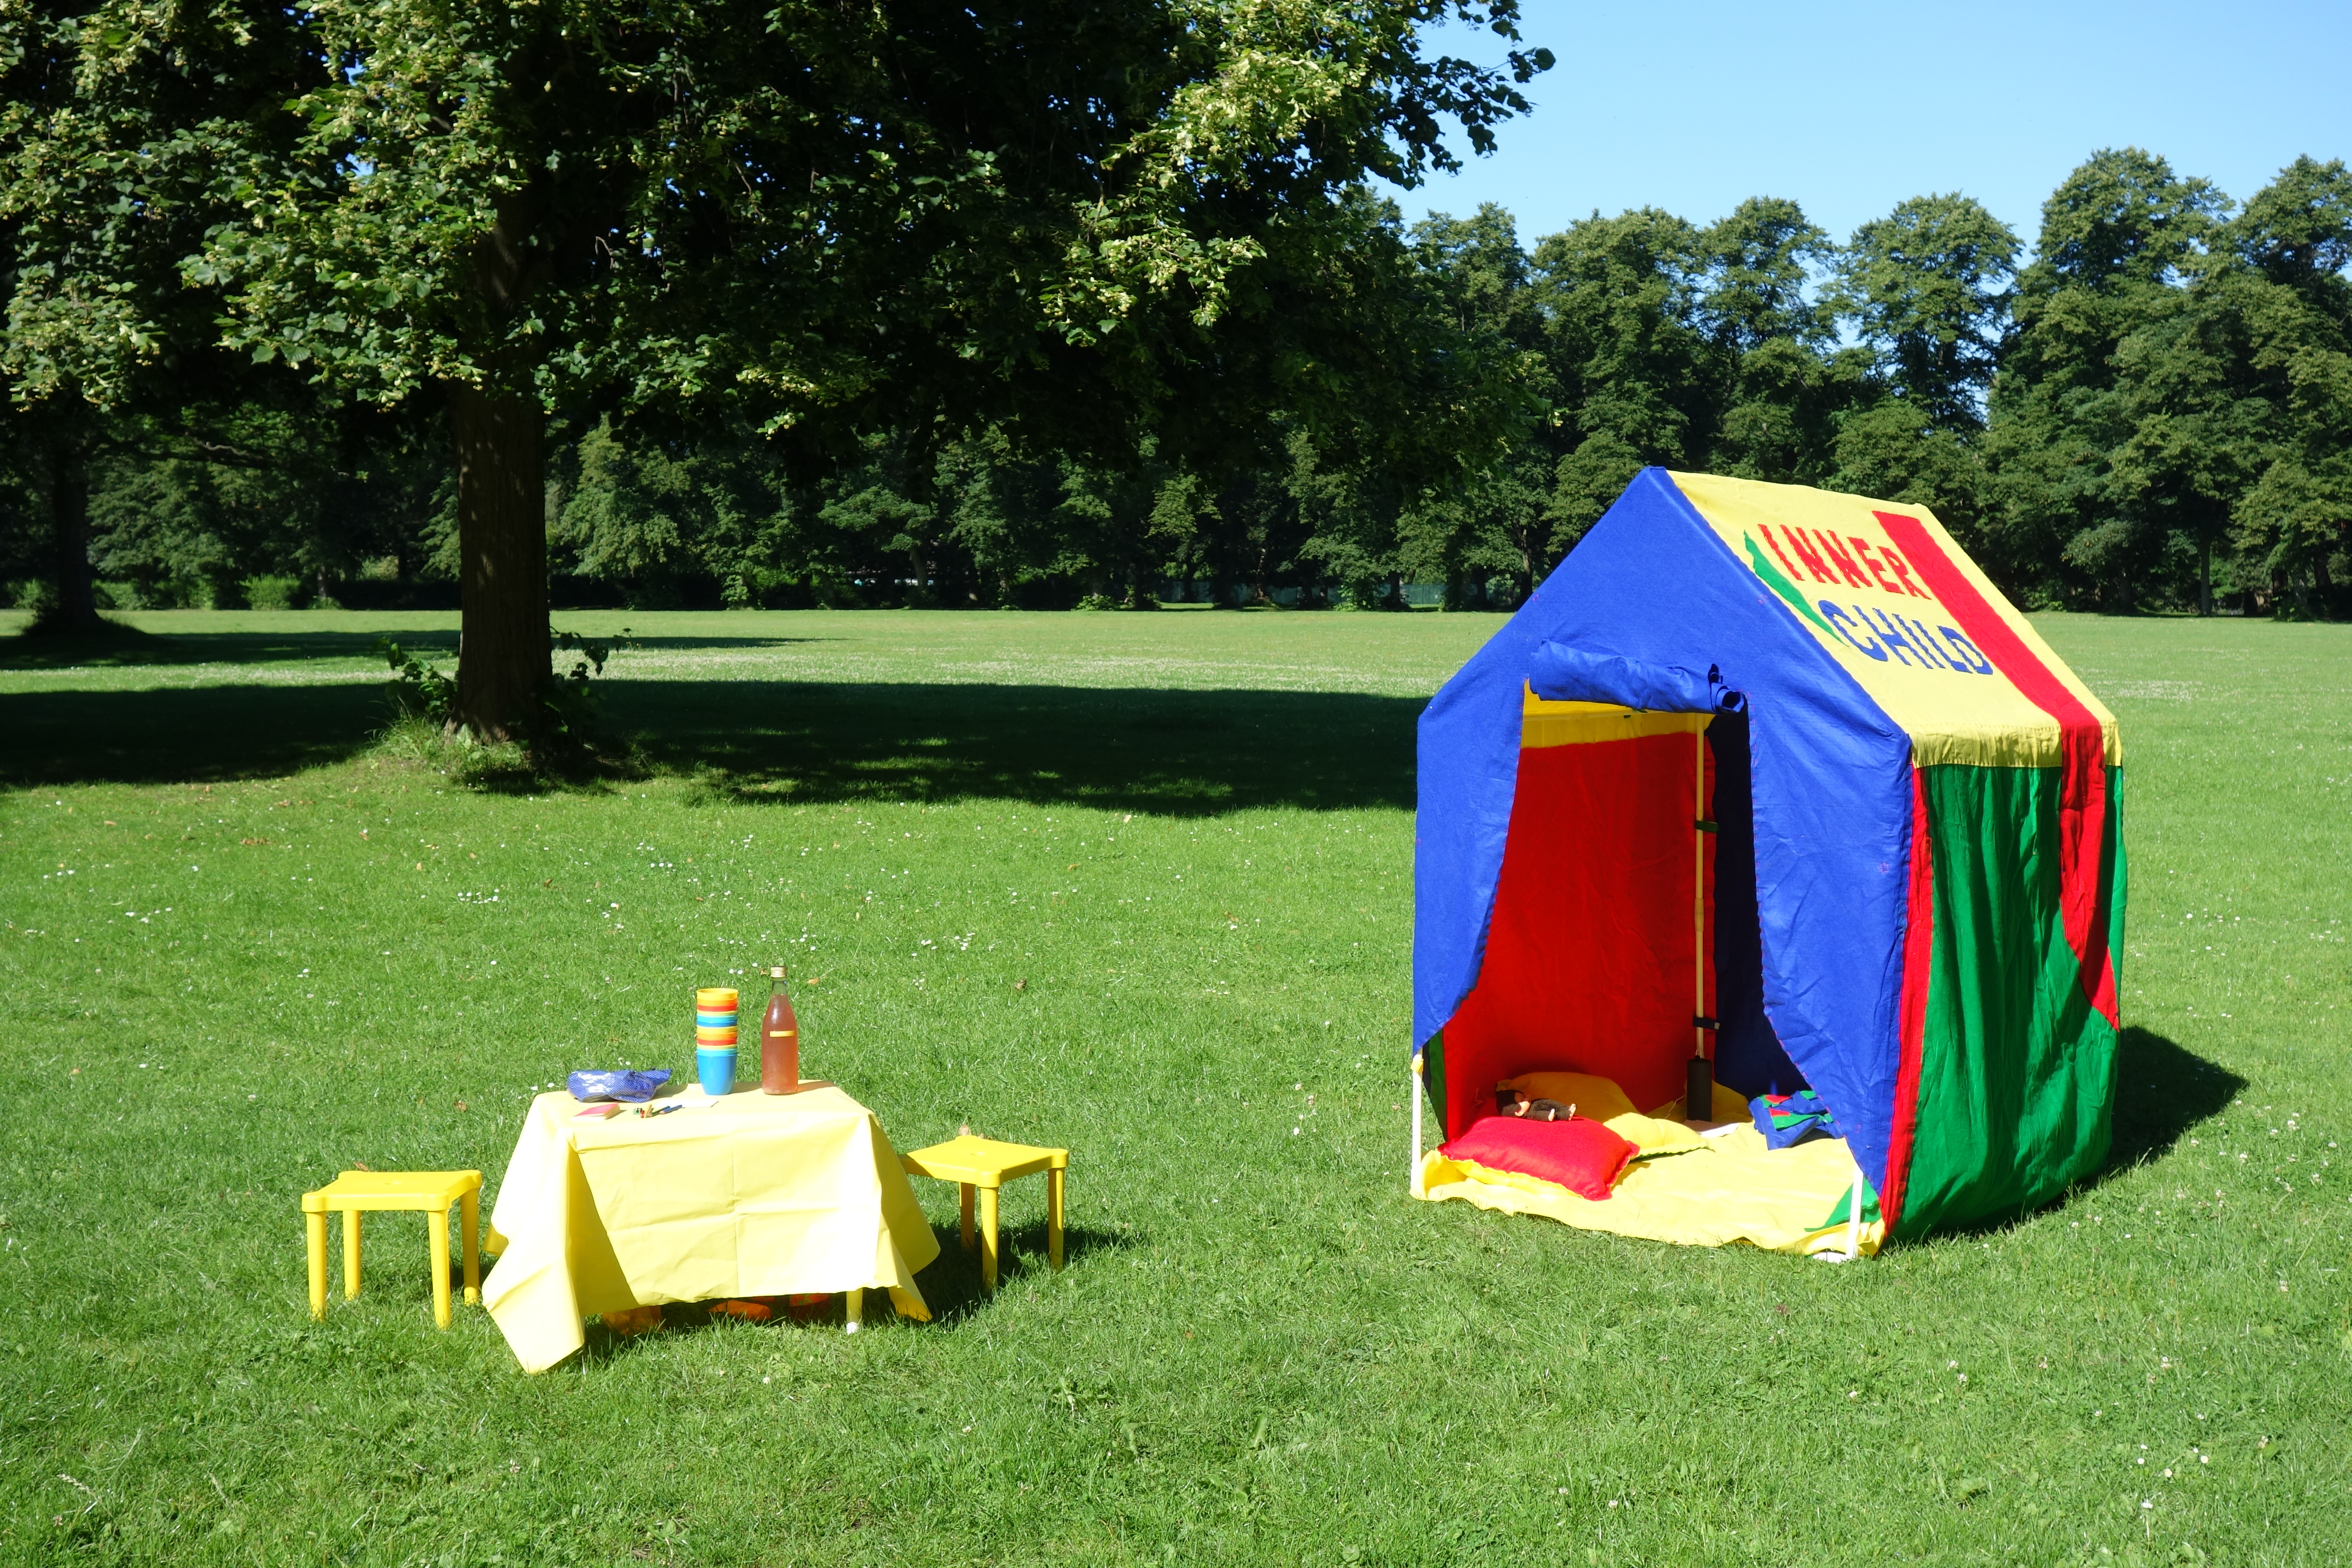 In a Park, on a sunny day, there is a felt hand-made children hut in green, red, yellow and blue, next to it a children plastic table and two chairs, in yellow.